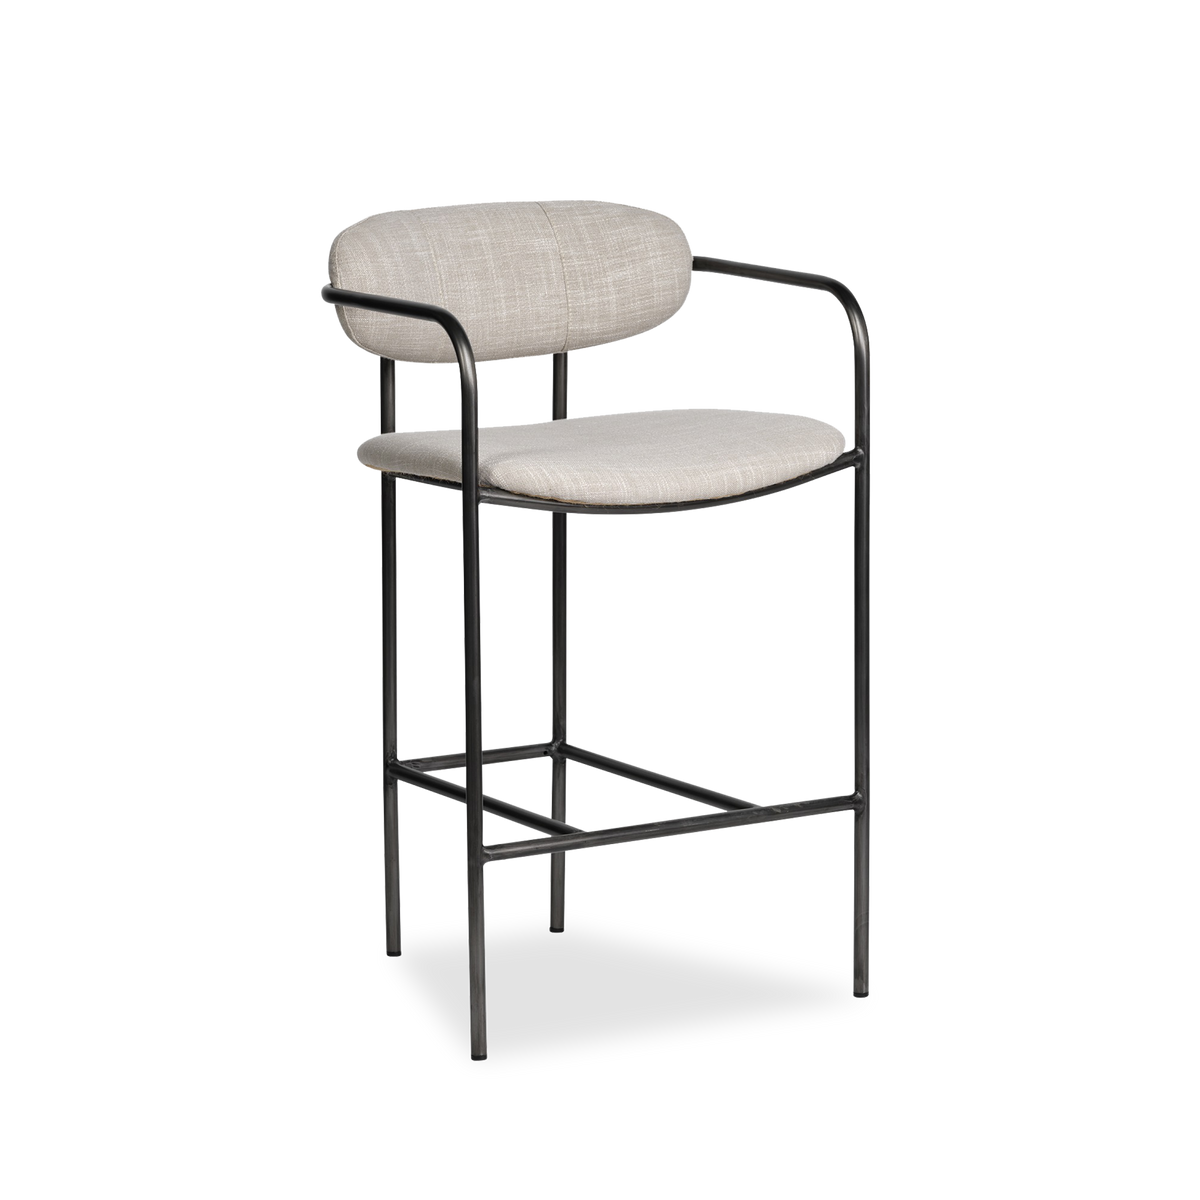 With its light frame, the Perry Counter Stool  flaunts a sleek silhouette full of modern ease.